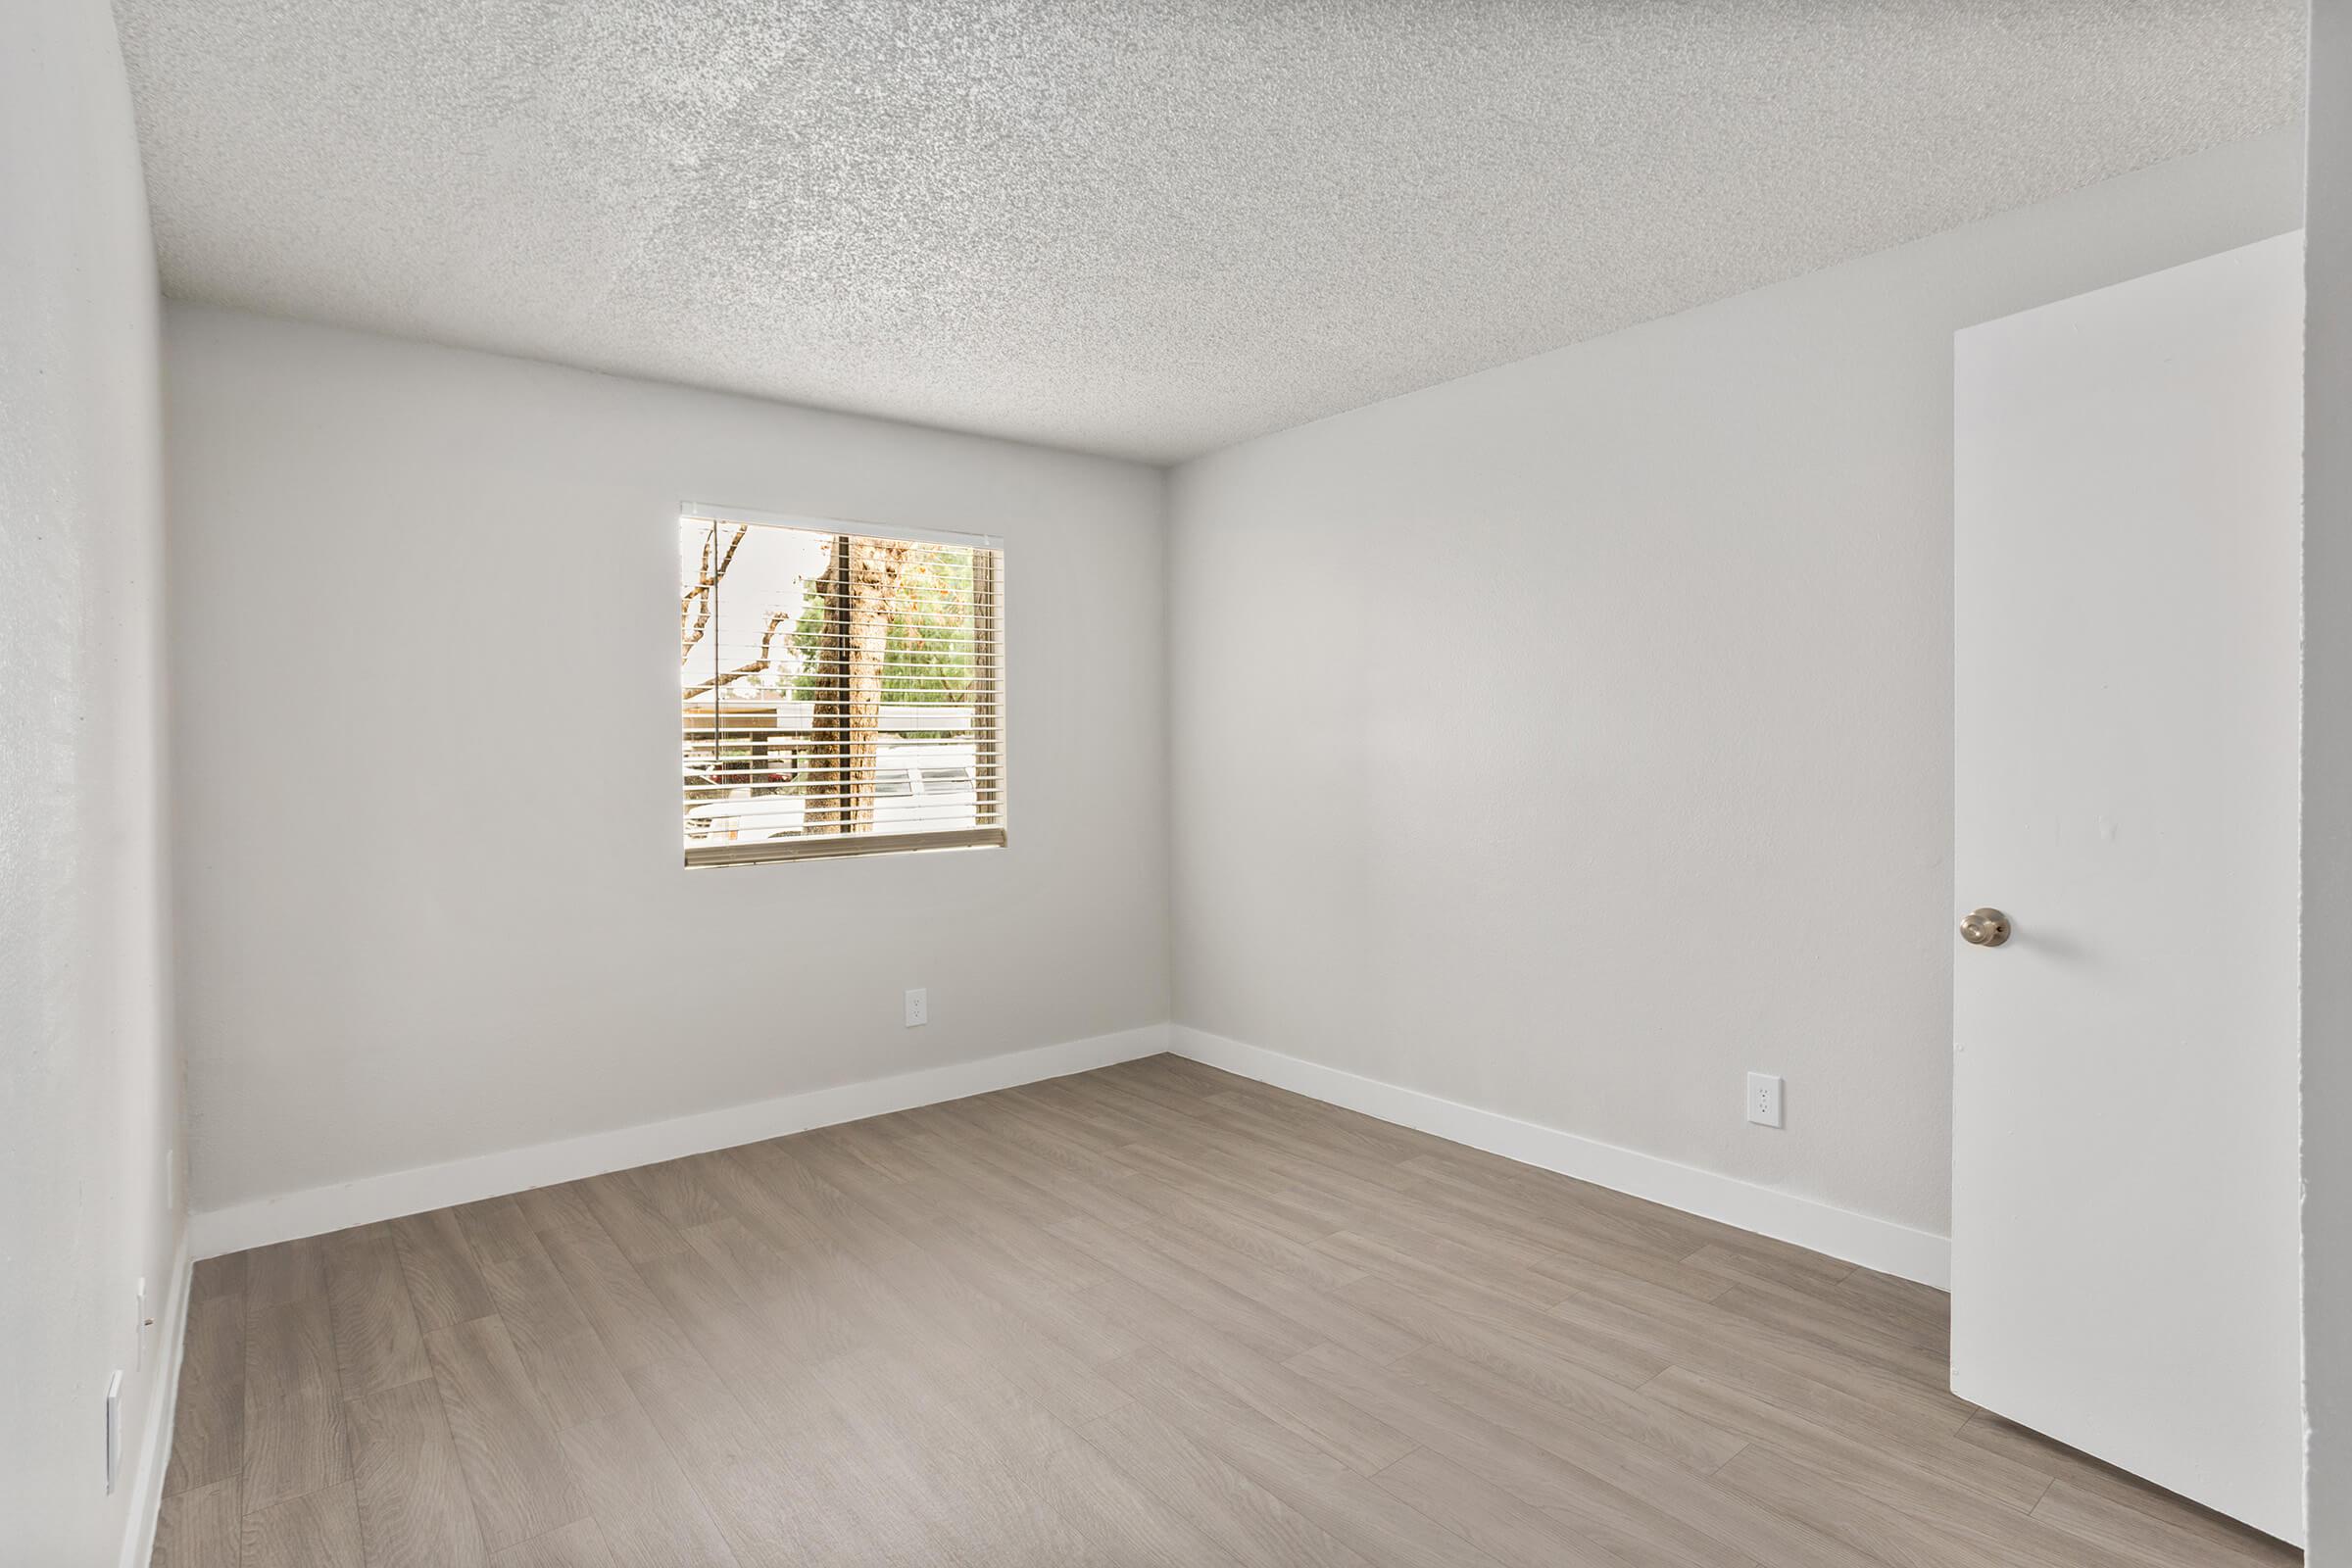 Large empty bedroom with plank flooring and a small window